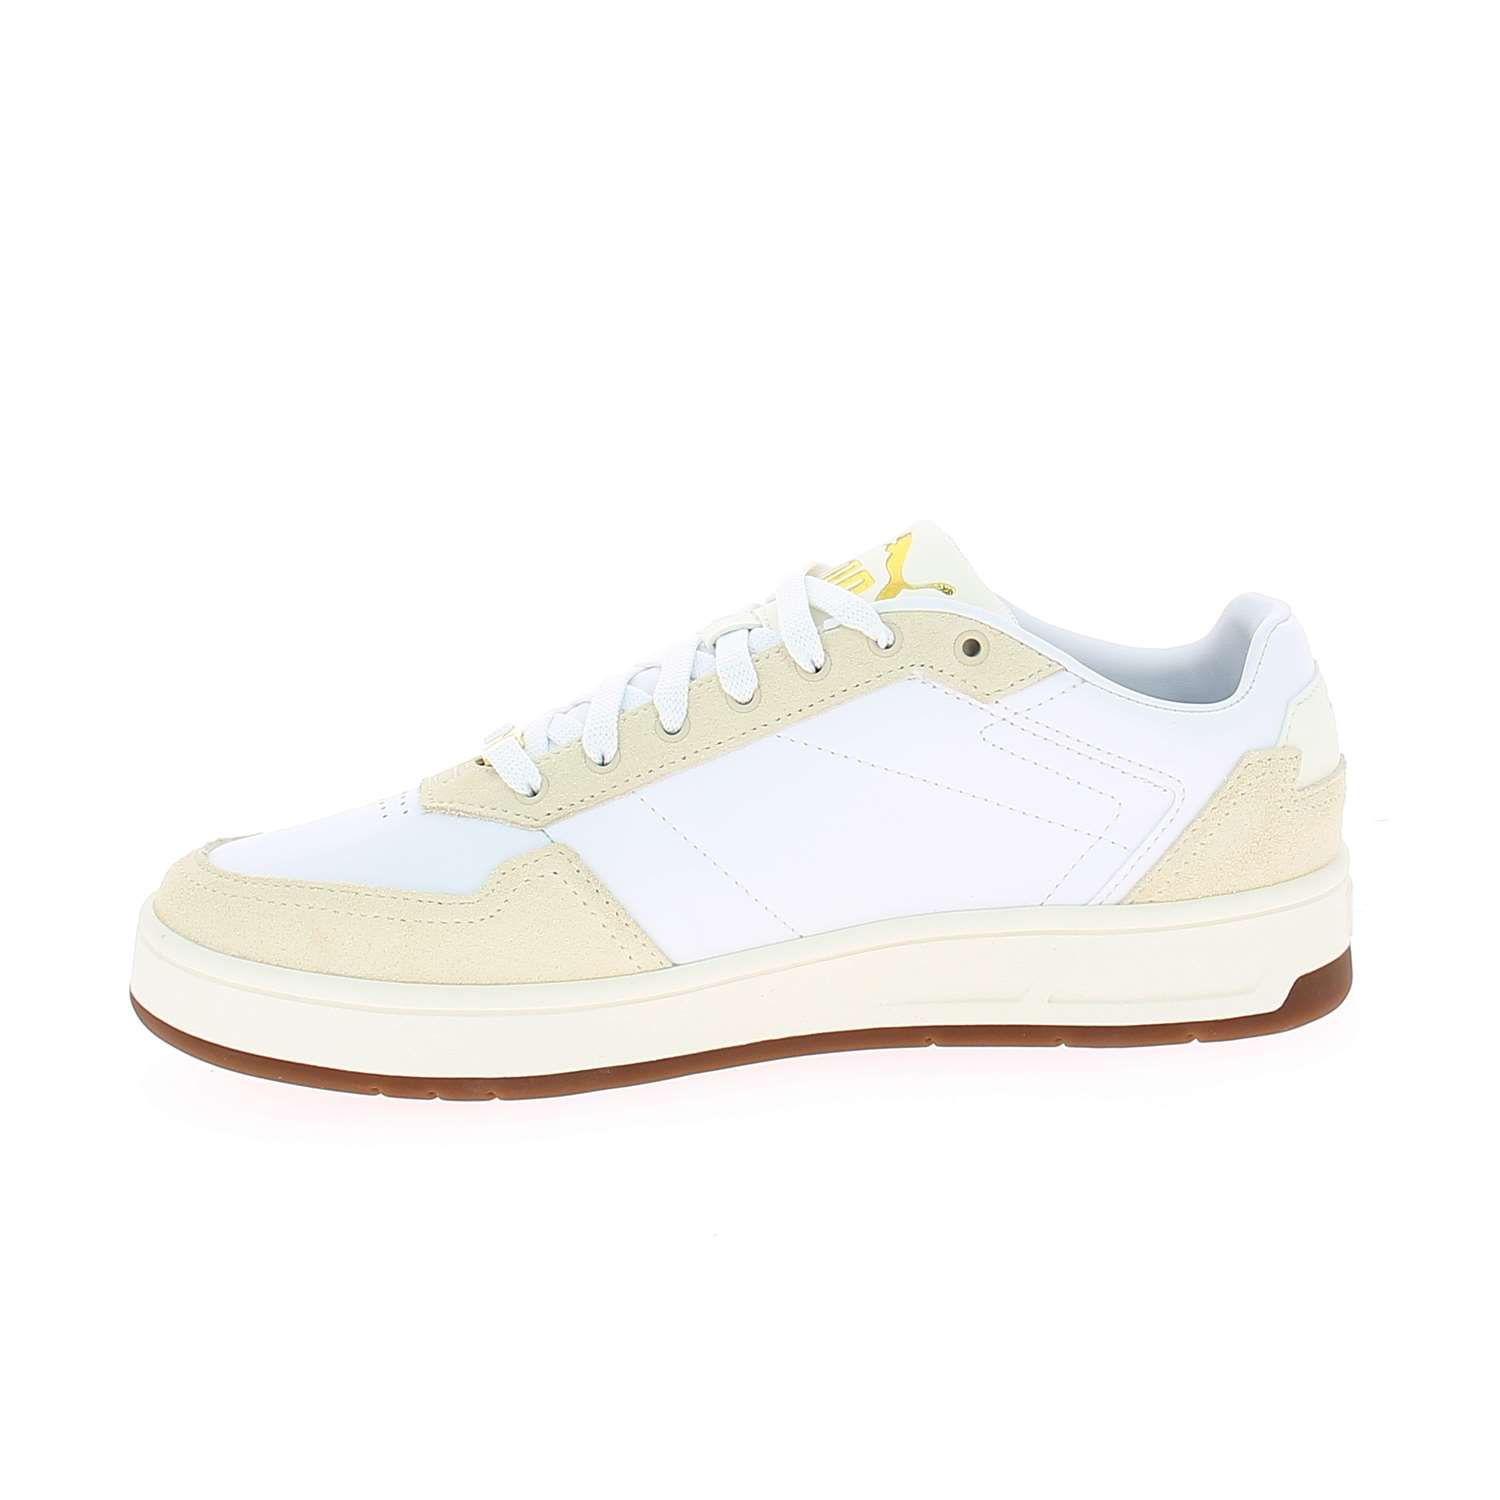 03 - CLASSIC COURT LUXE - PUMA -  - Synthétique